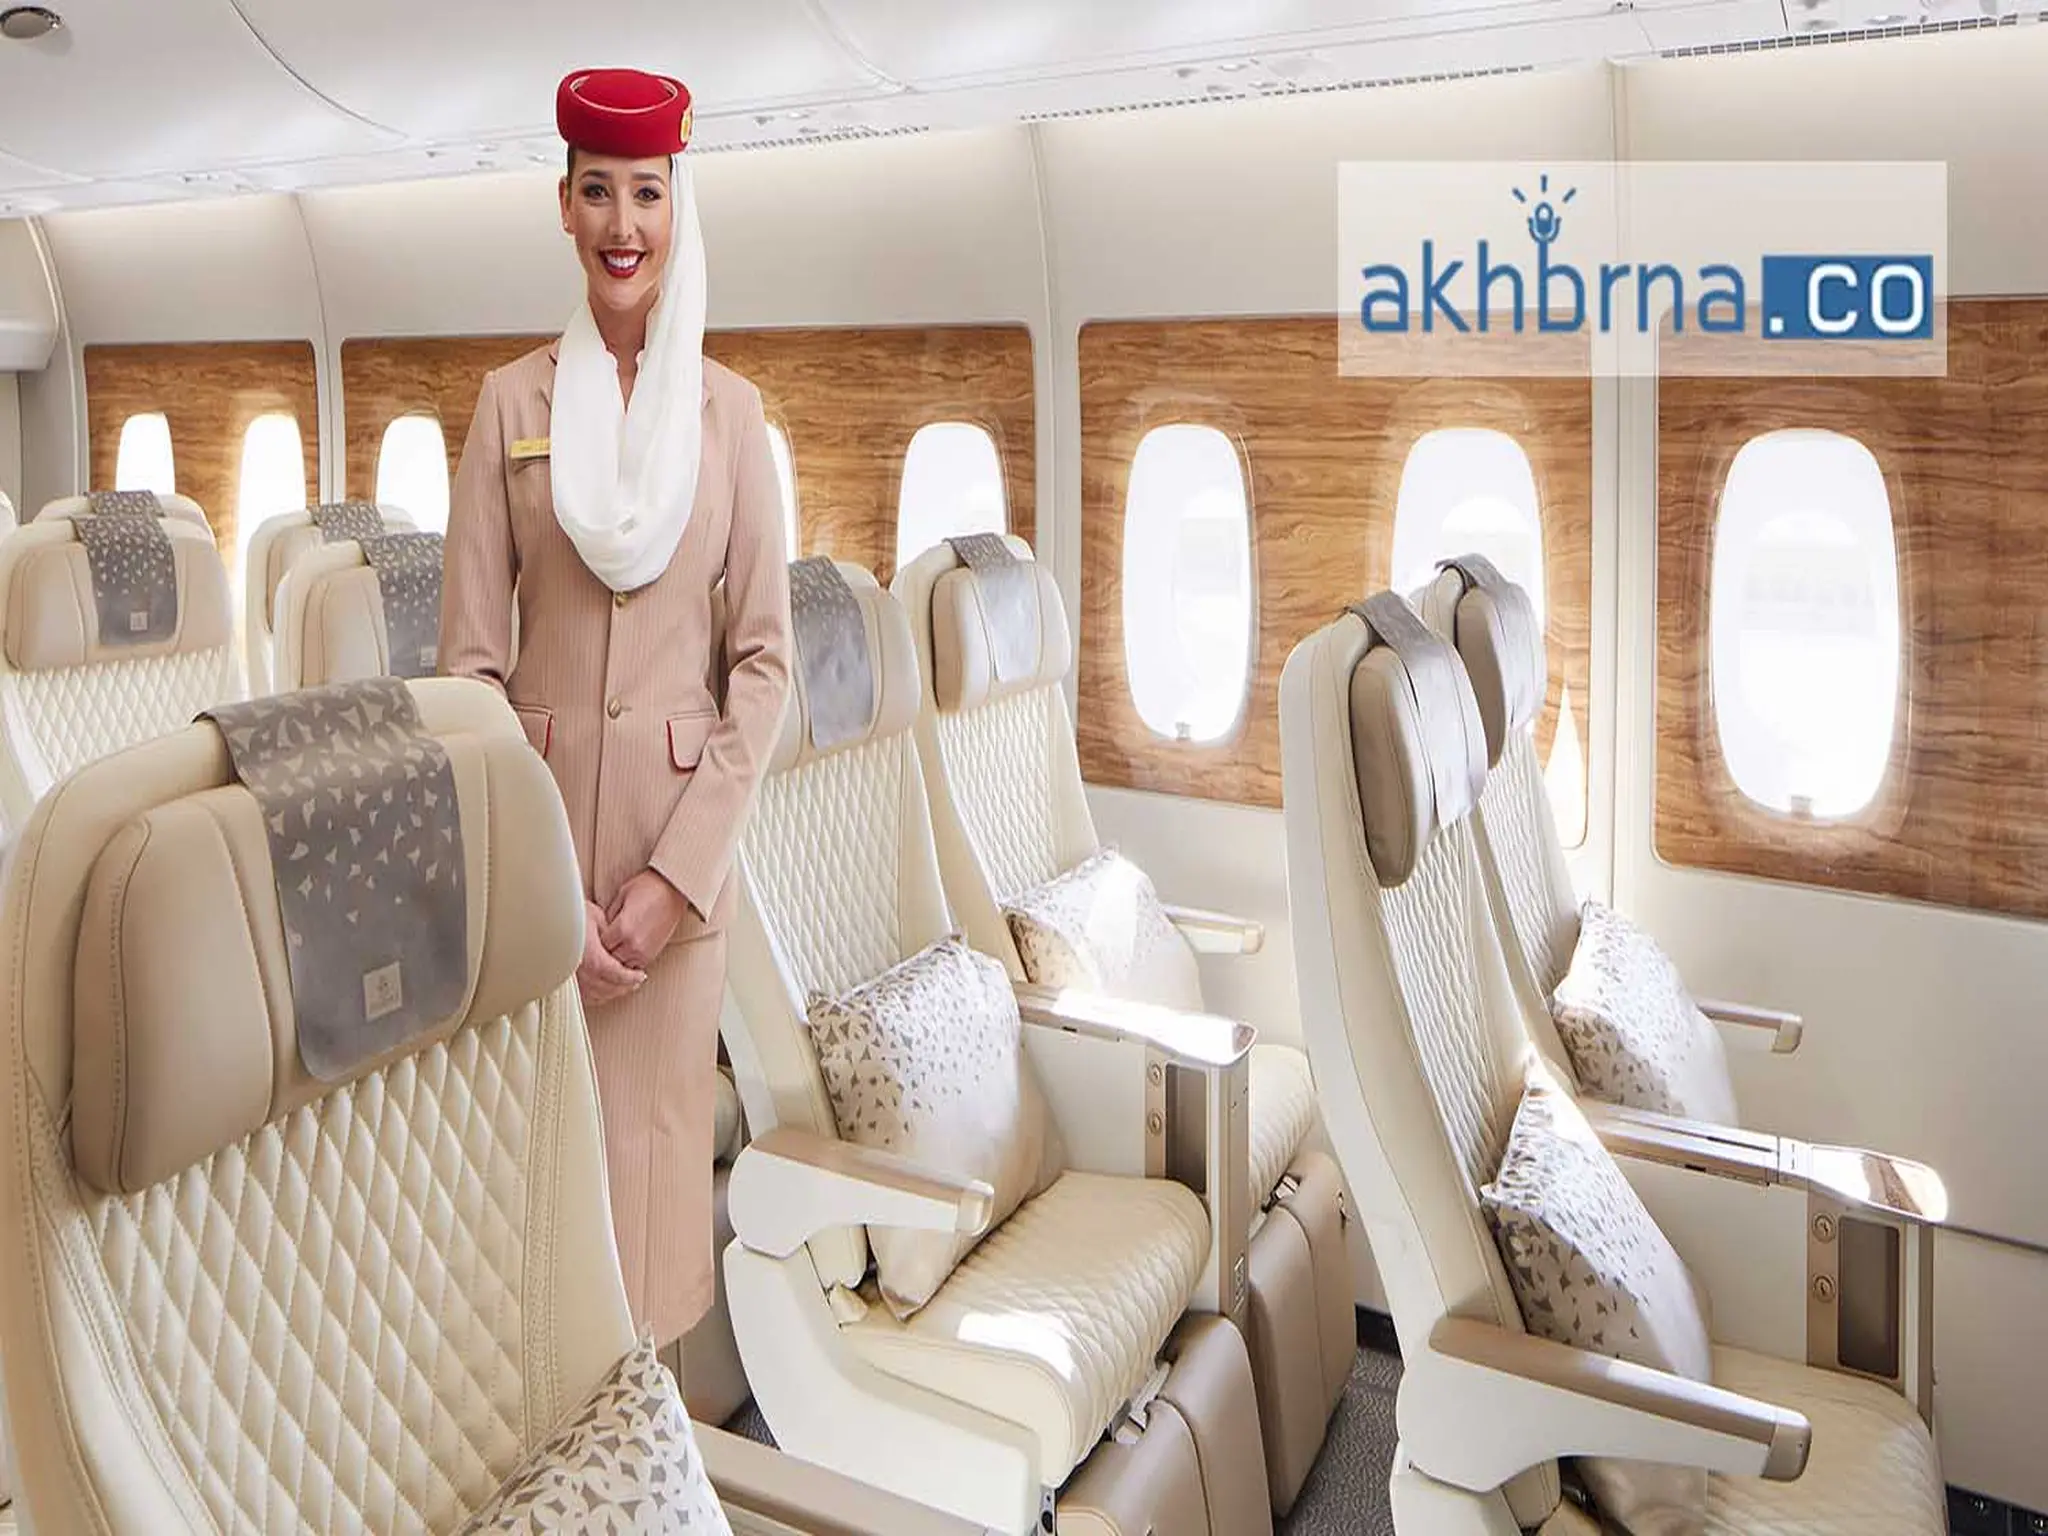 Attractive fares from Emirates Airlines for travel during Eid Al Fitr